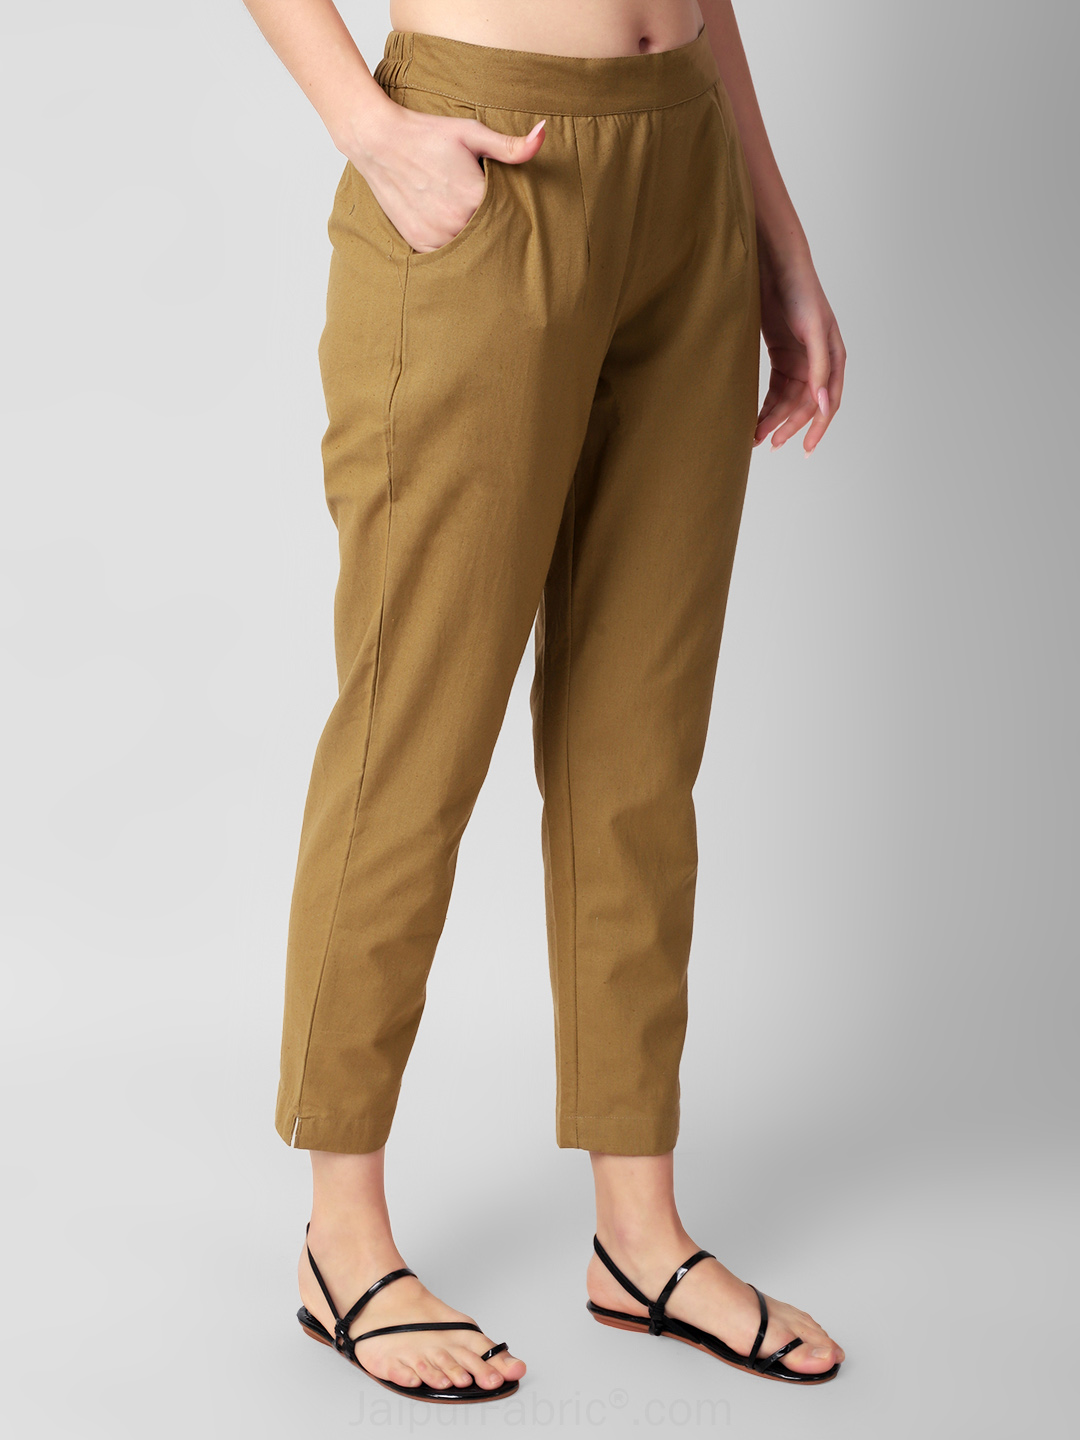 Tortilla Brown Women Cotton Pants casual and semi formal daily trousers